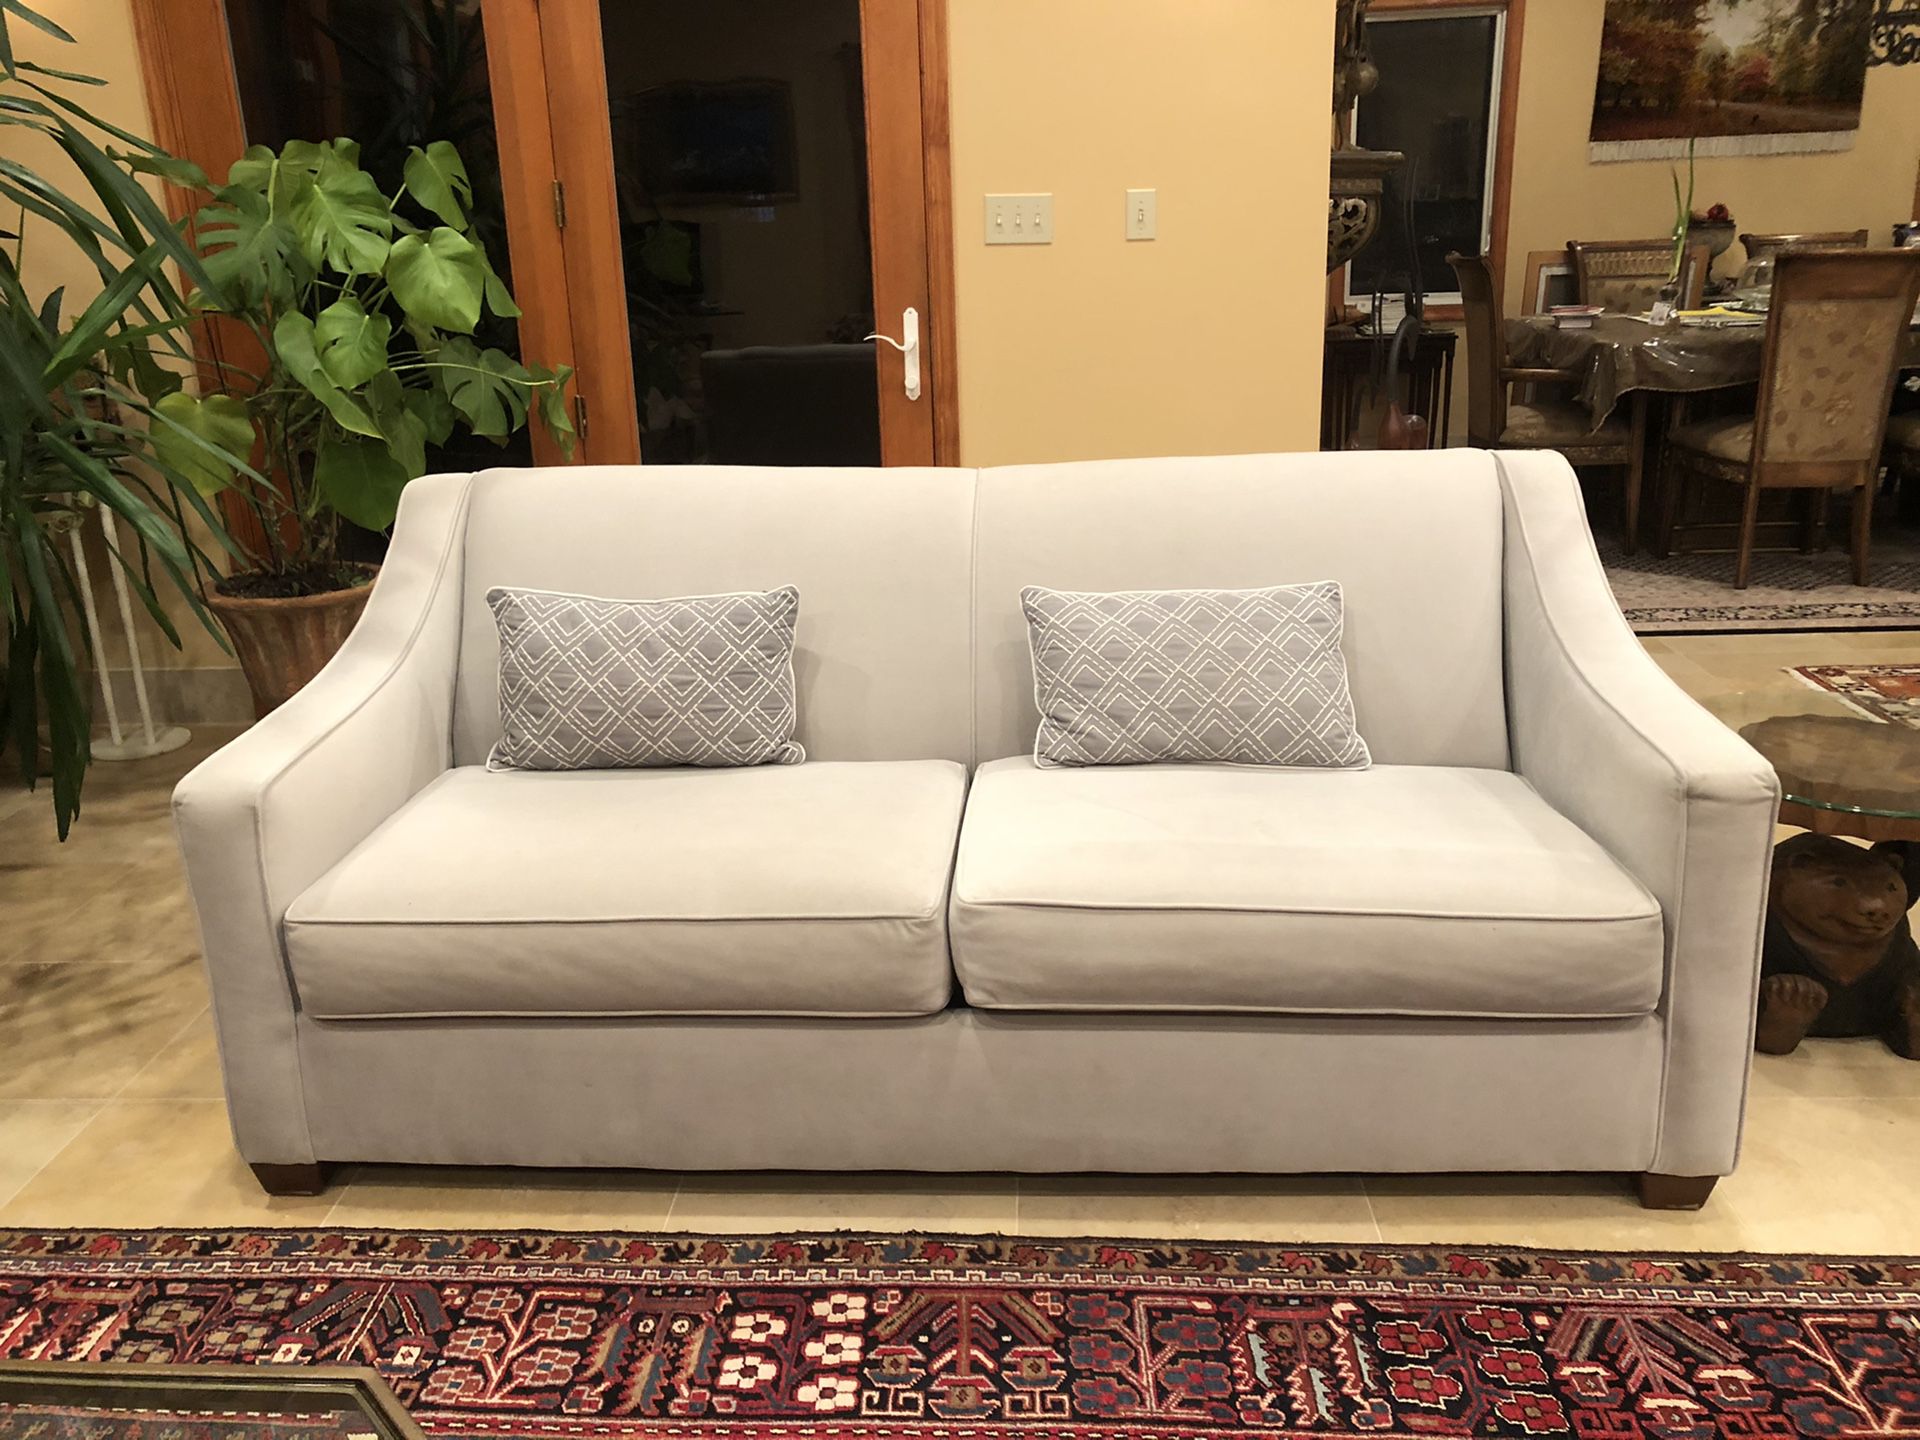 Sofa bed with memory foam mattress never used